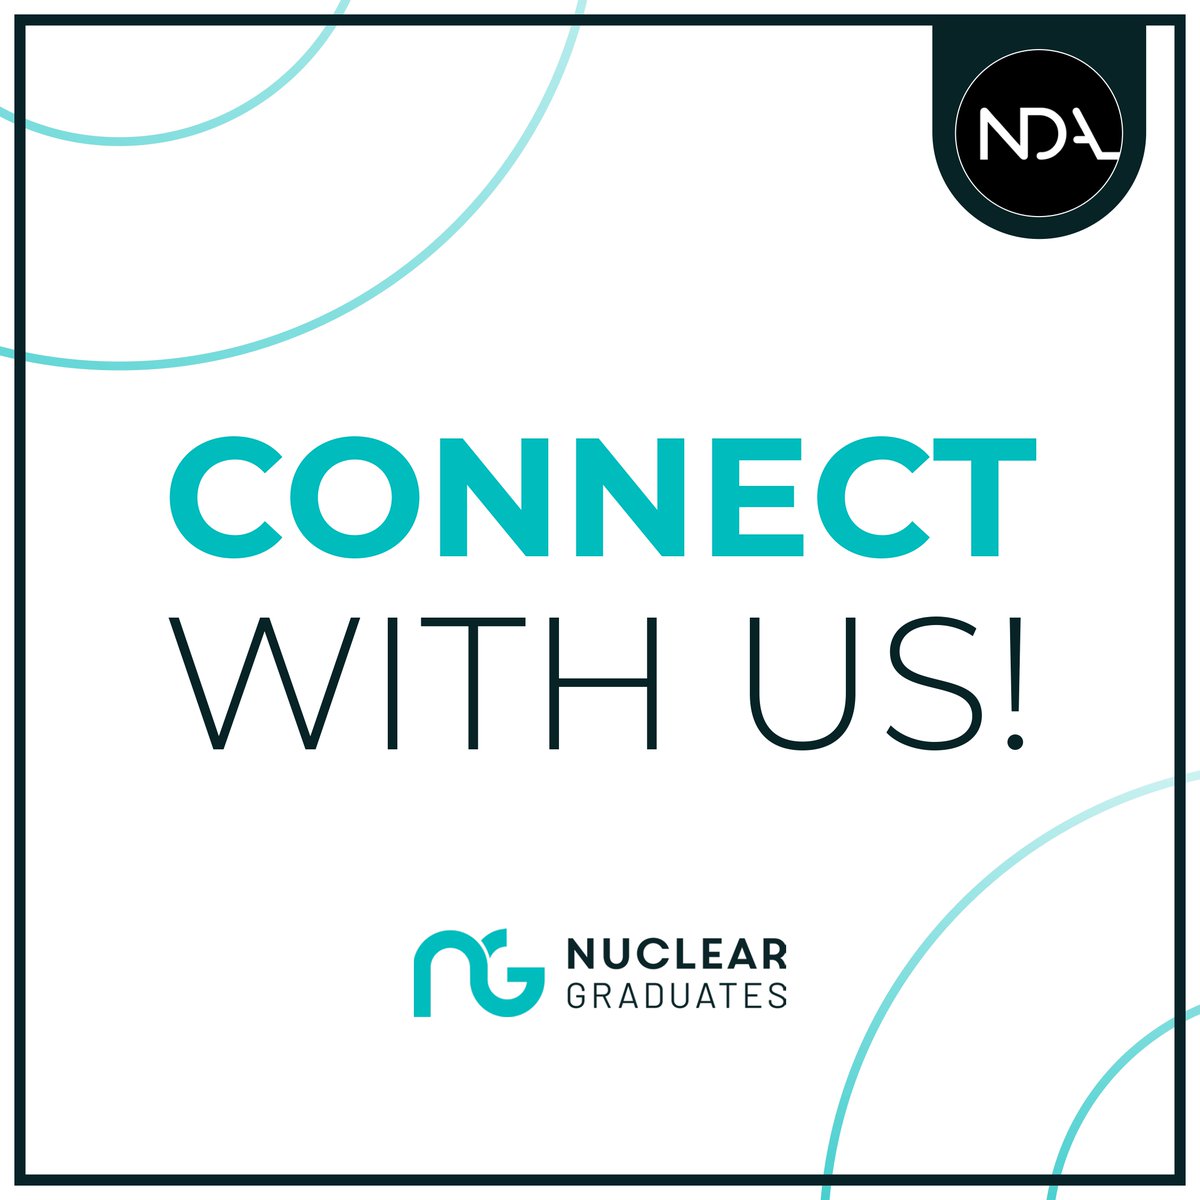 Interested in the Nuclear Graduate programme? Register your interest for our 2025 cohort now - nucleargraduates.com

#NuclearGraduates #Nuclear #Science #Engineering #Technlogy #CareerInNuclear